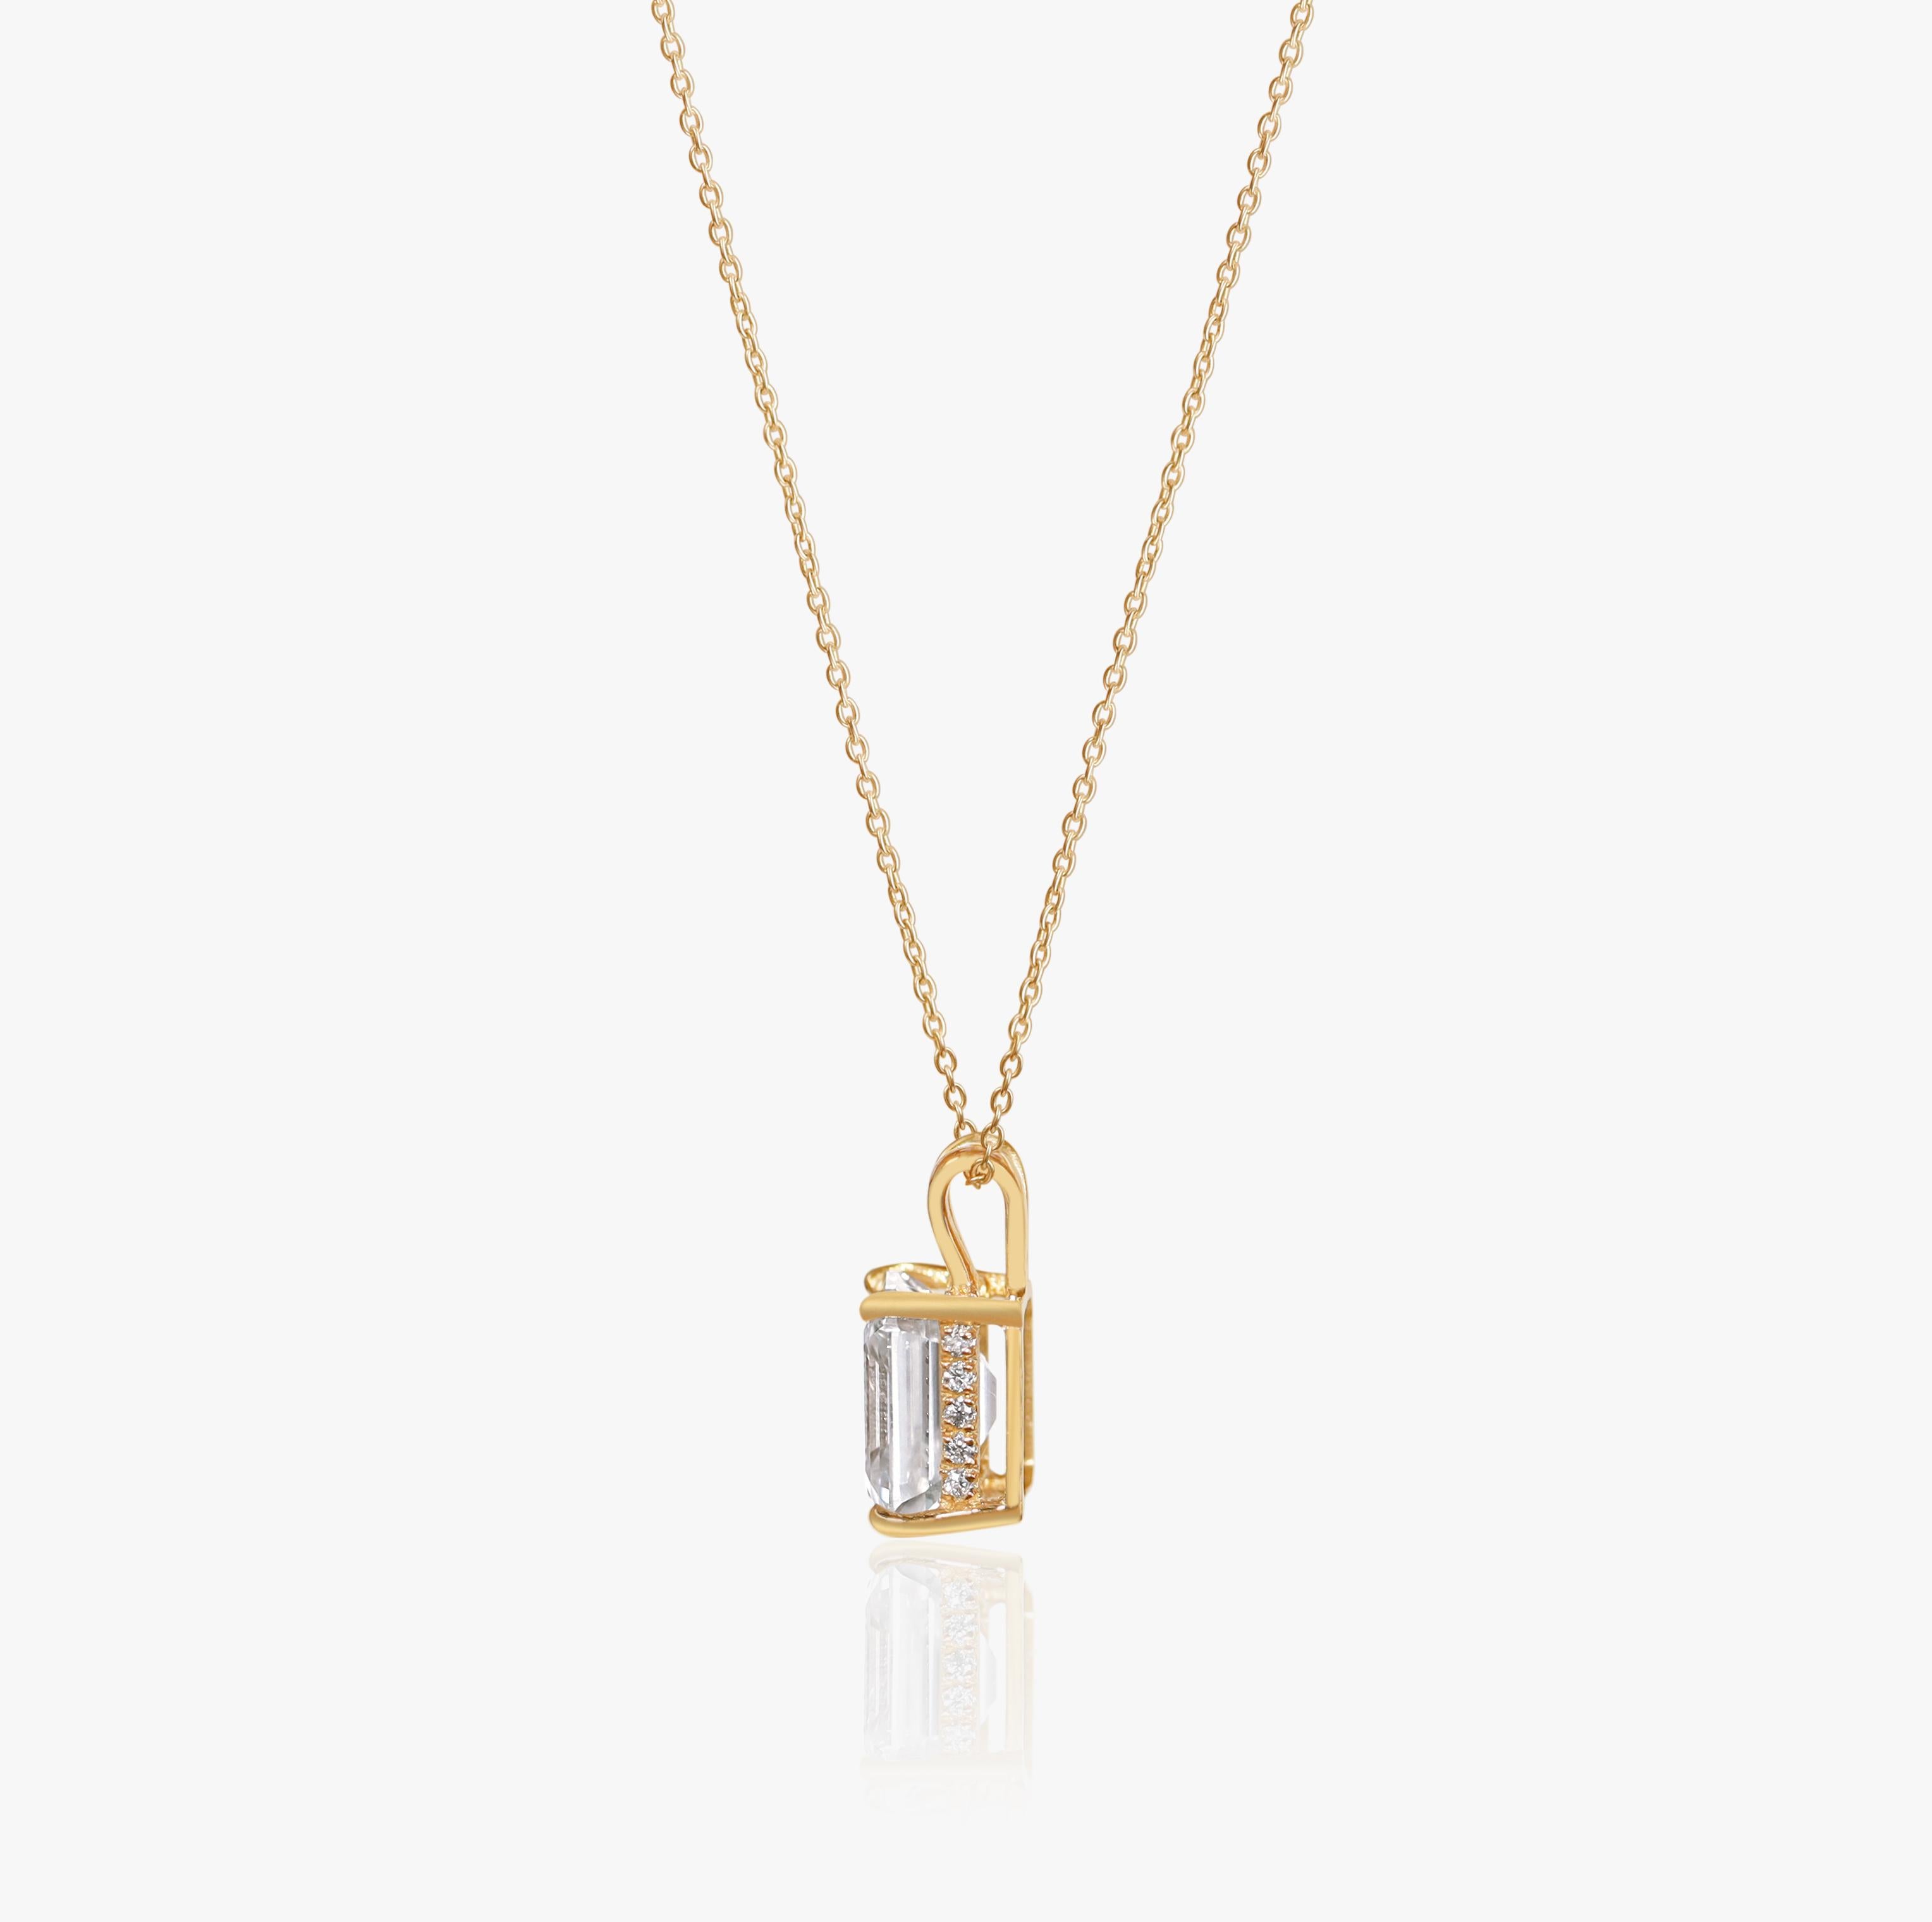 Art Deco GIA Report Certified 4 Carat Emerald Cut Diamond 18k Yellow Gold Pendant for her For Sale